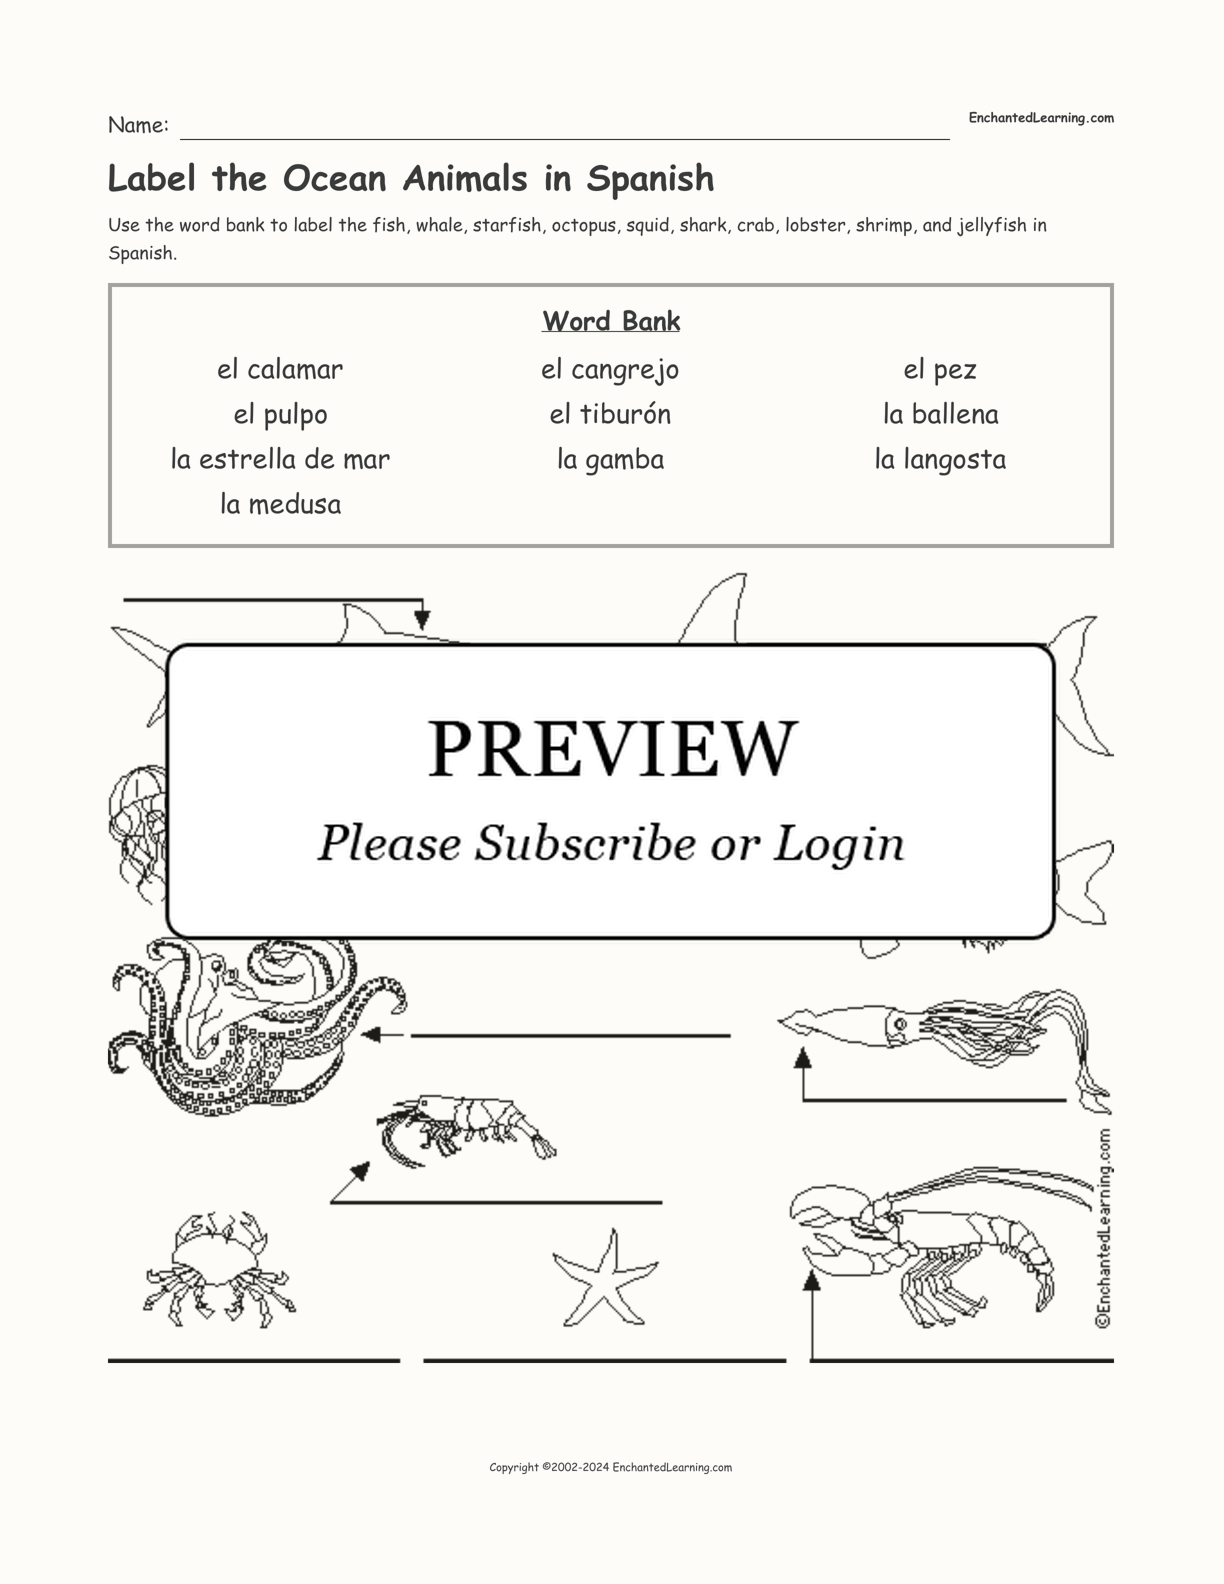 Label the Ocean Animals in Spanish interactive worksheet page 1